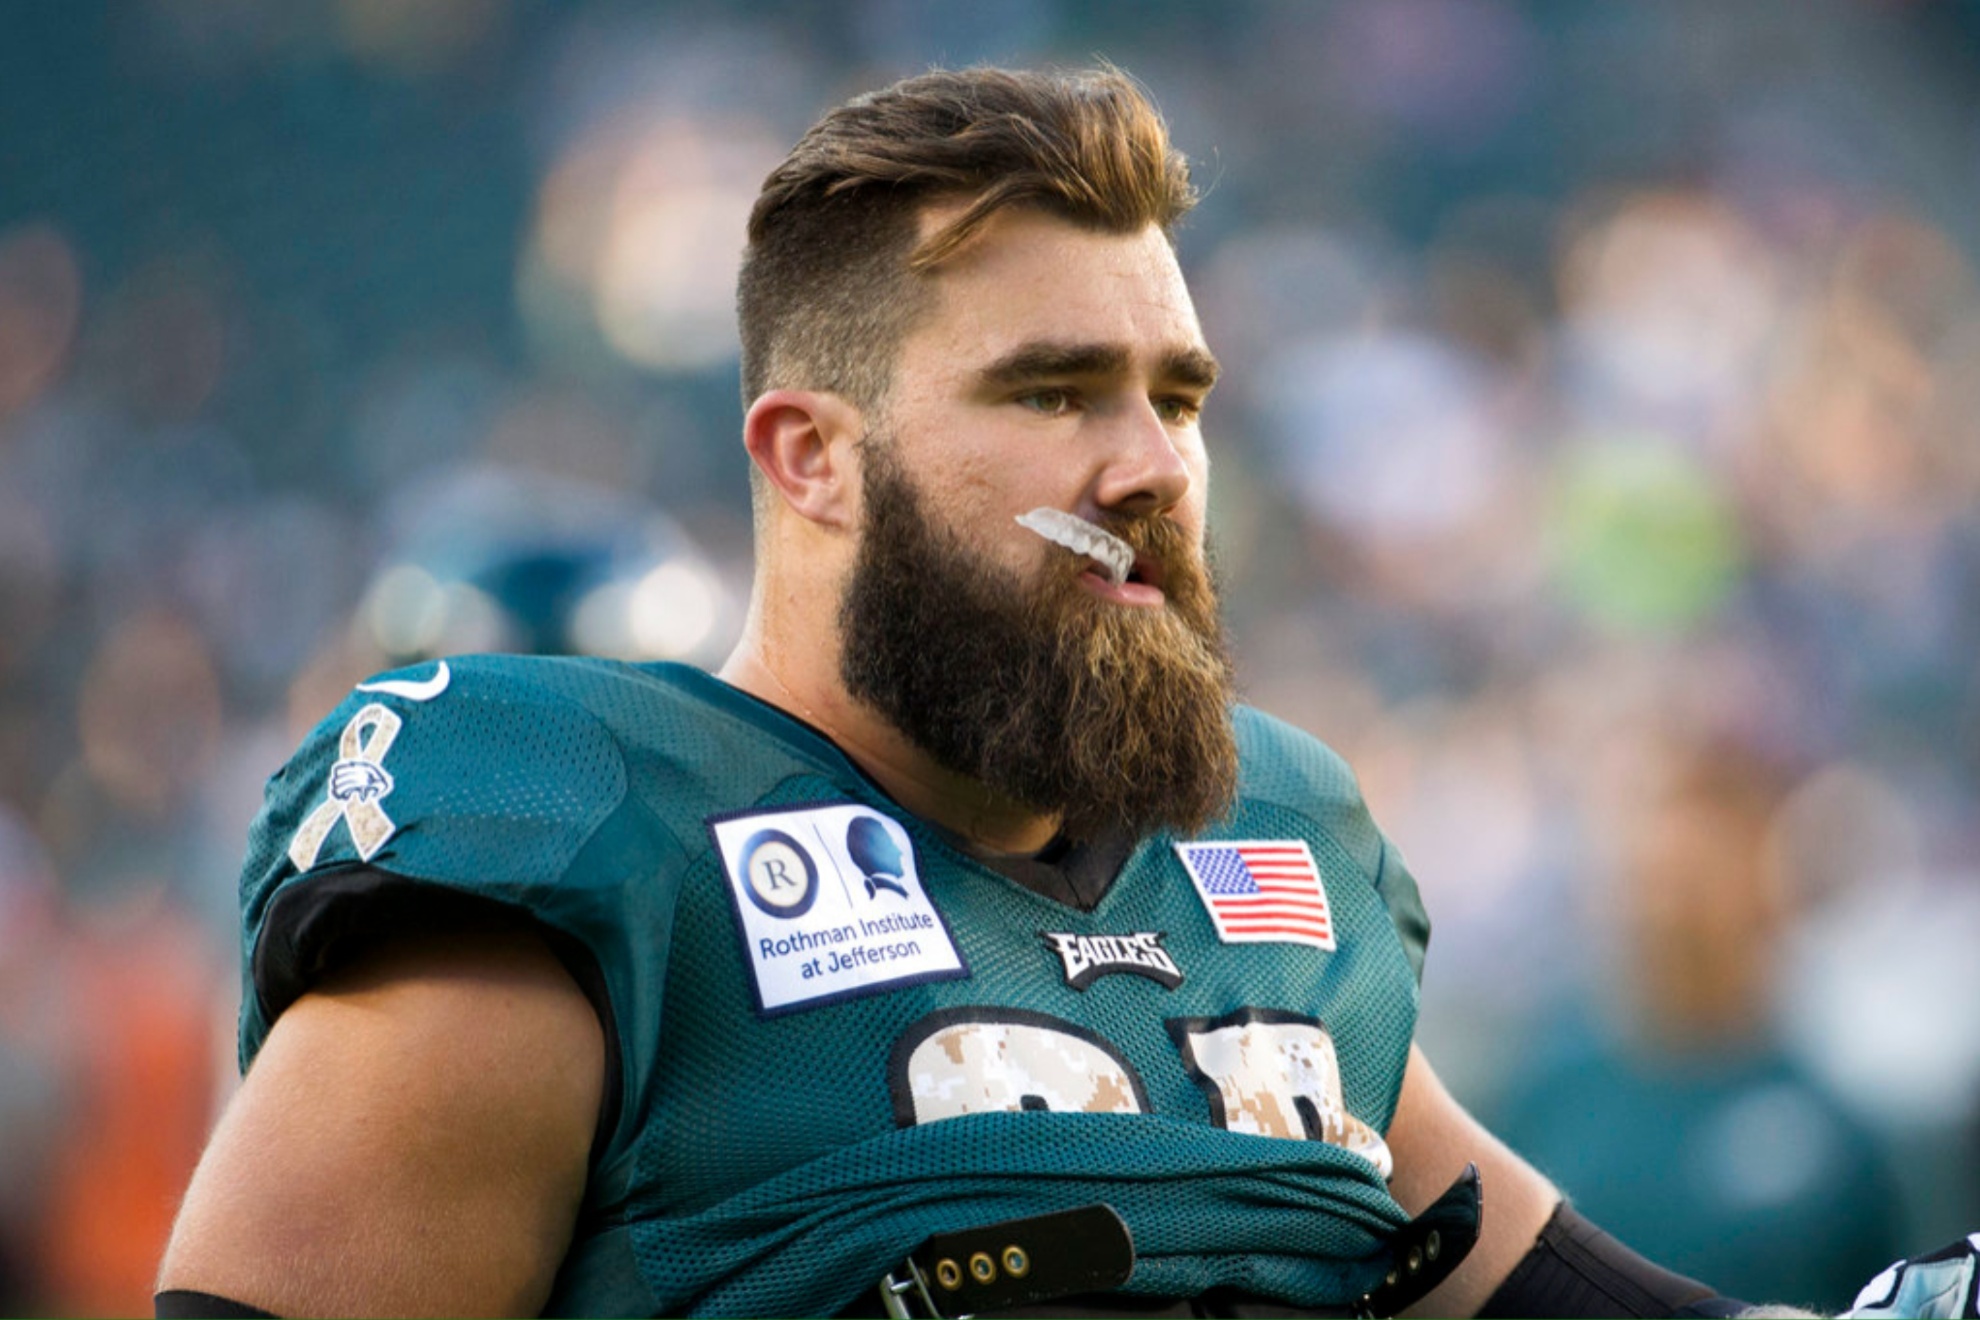 Jason Kelce confessed he lost his Super Bowl ring at a recent event